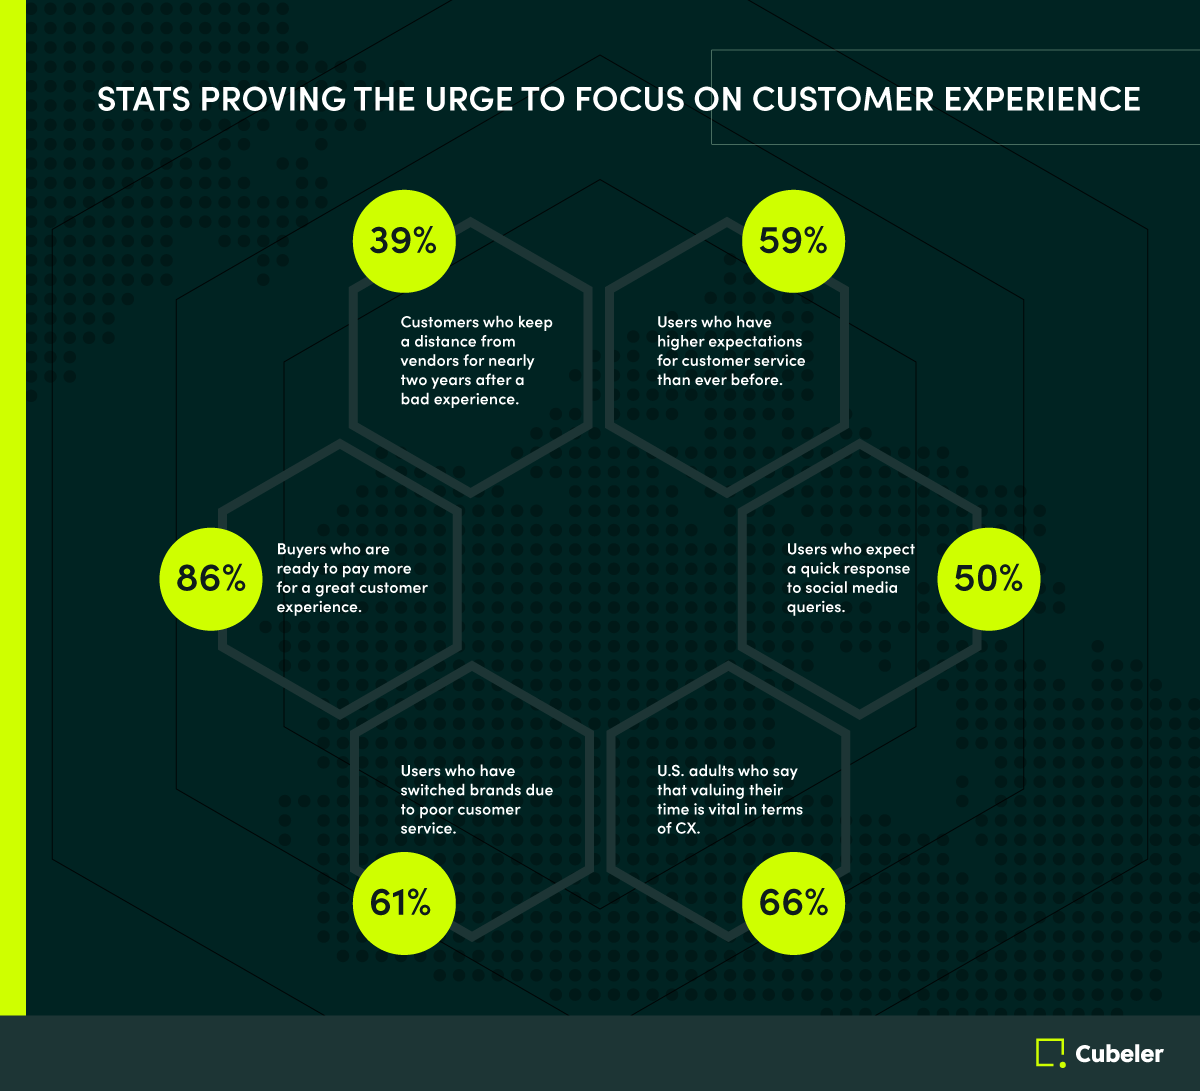 Why Small Businesses Should Focus on the Customer Experience